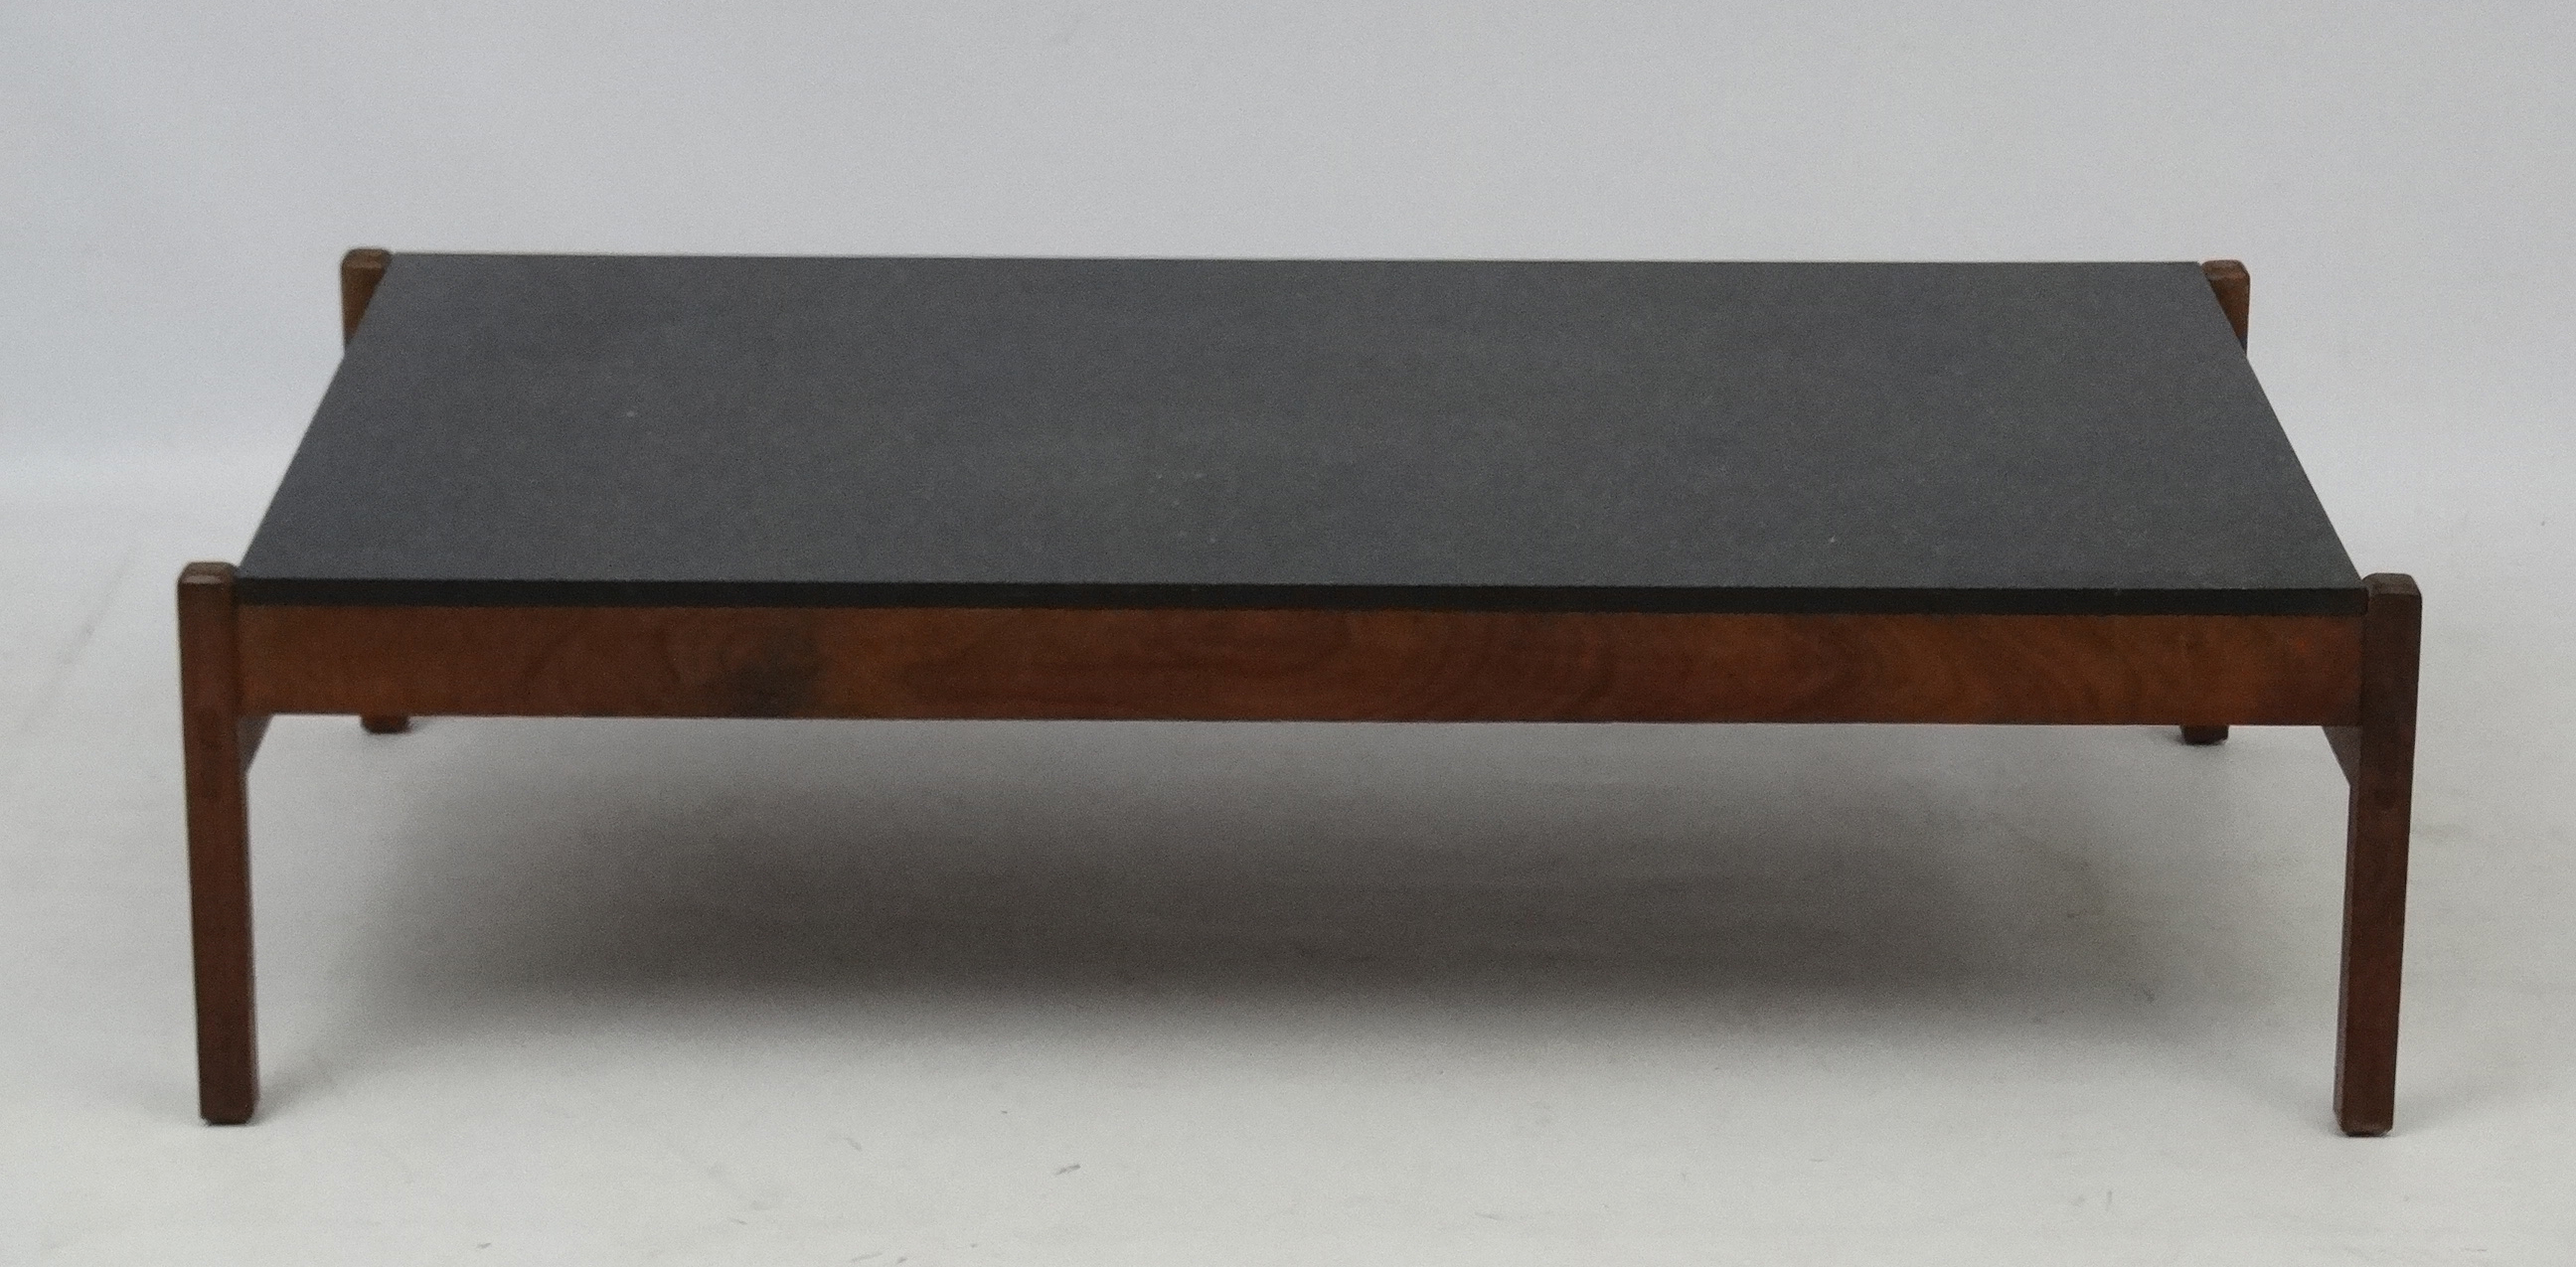 Vintage Retro: a low walnut and faux granite coffee table, measuring 46" long x 24" wide x 12" high. - Image 2 of 4